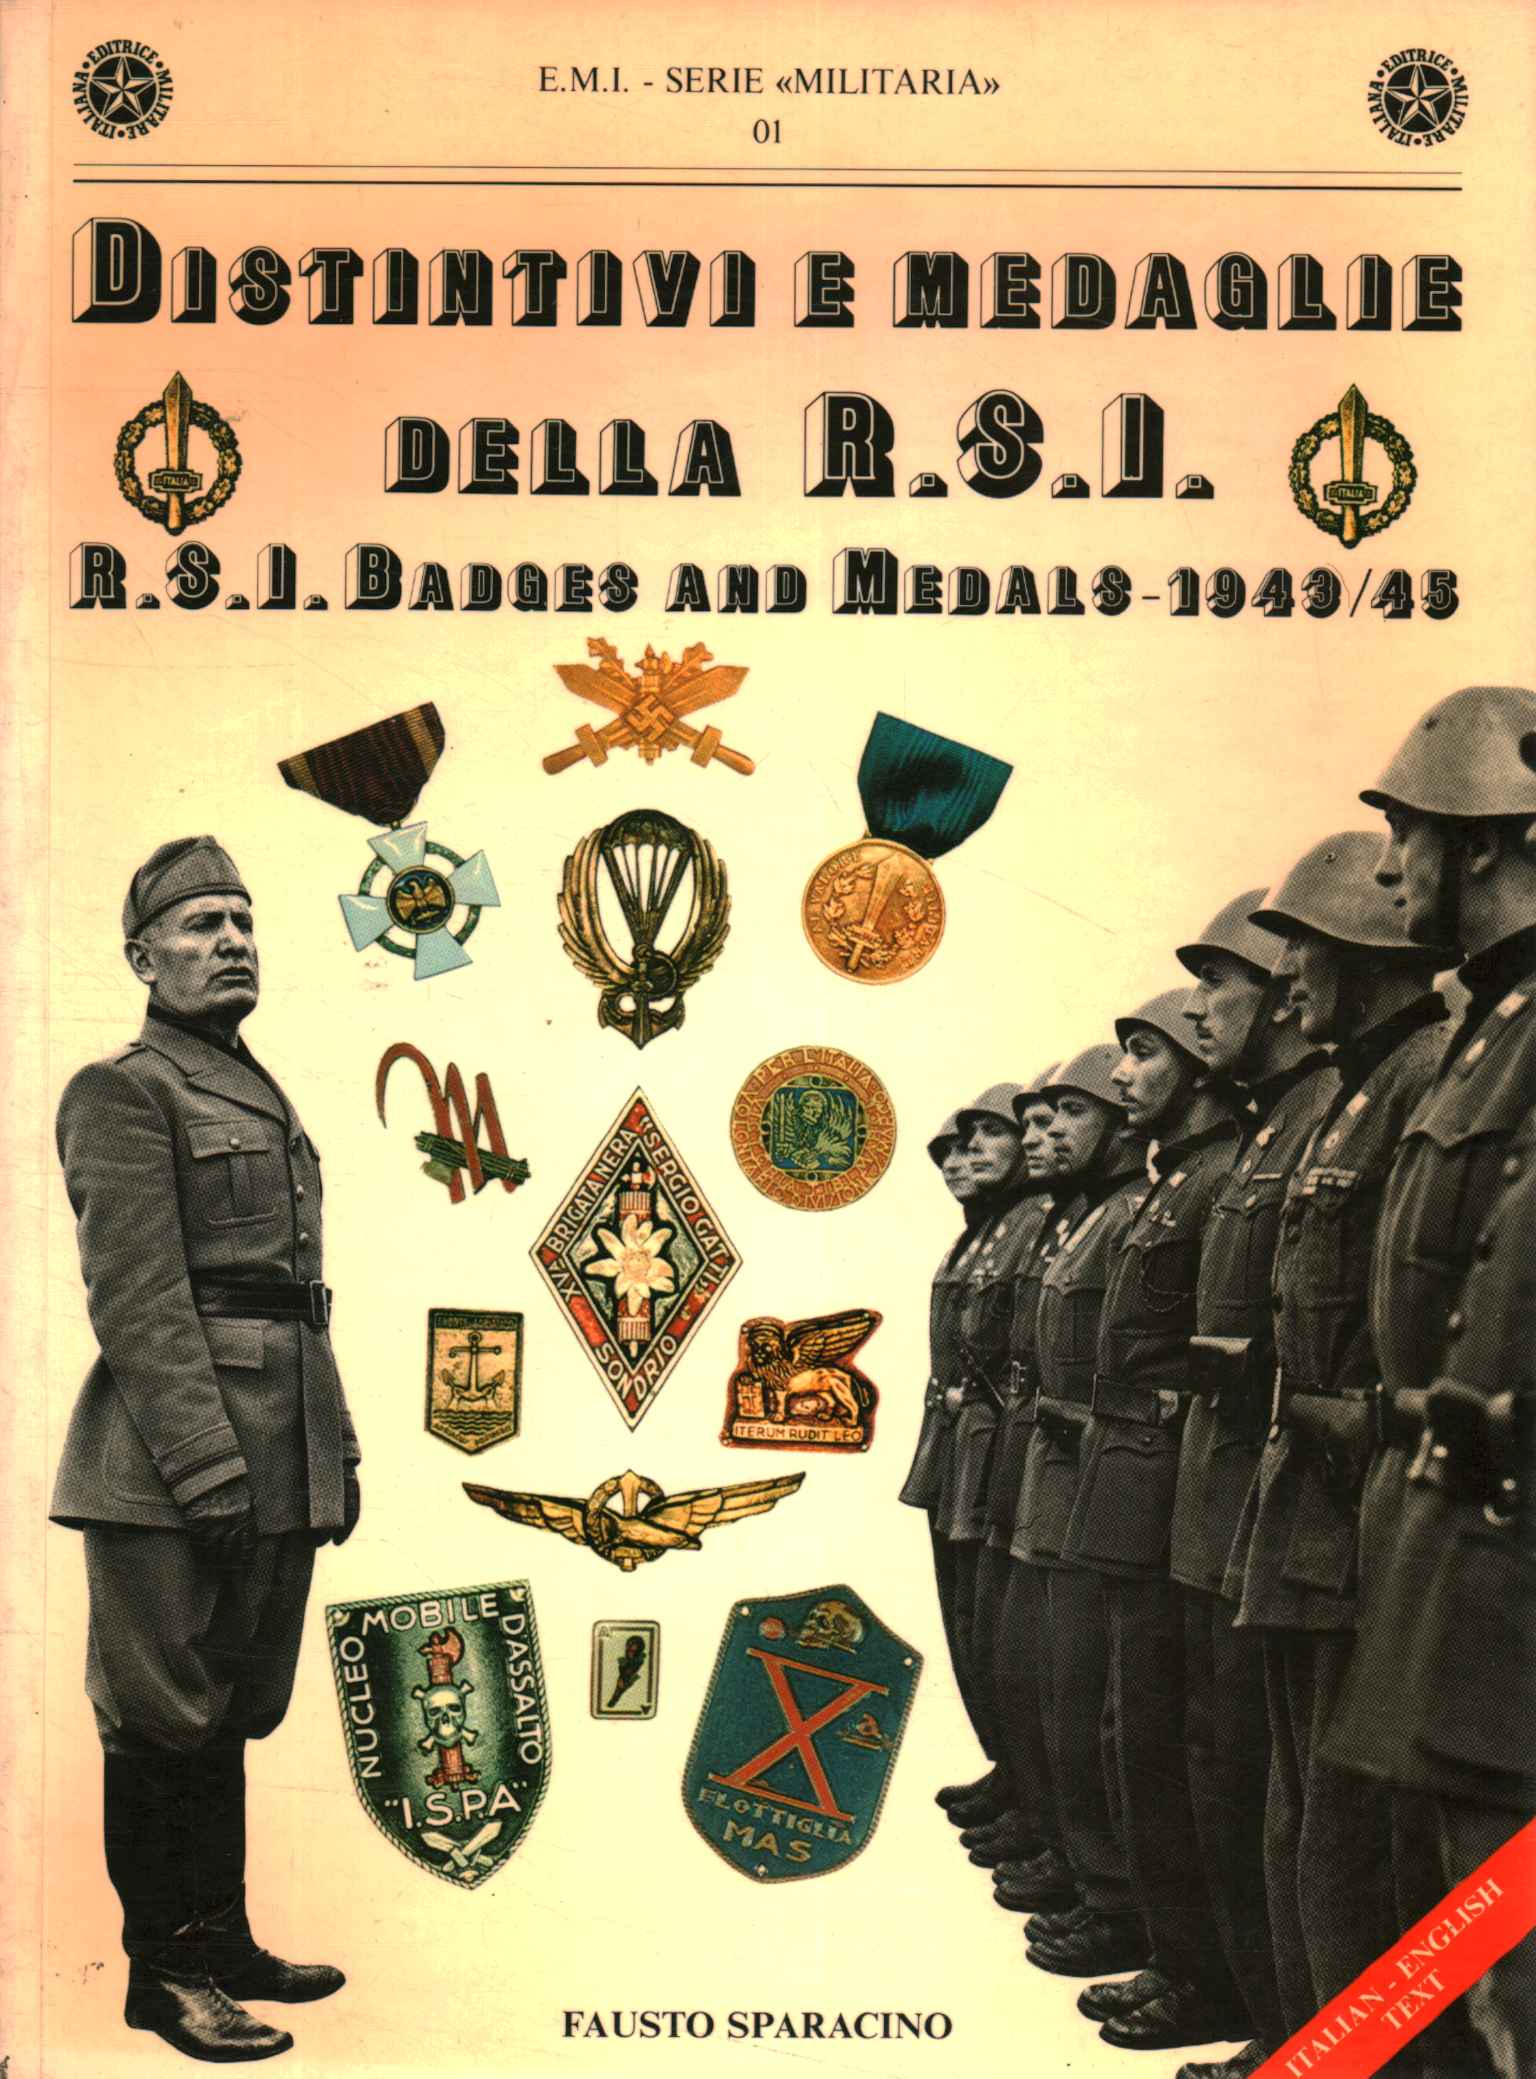 R.S.I. badges and medals